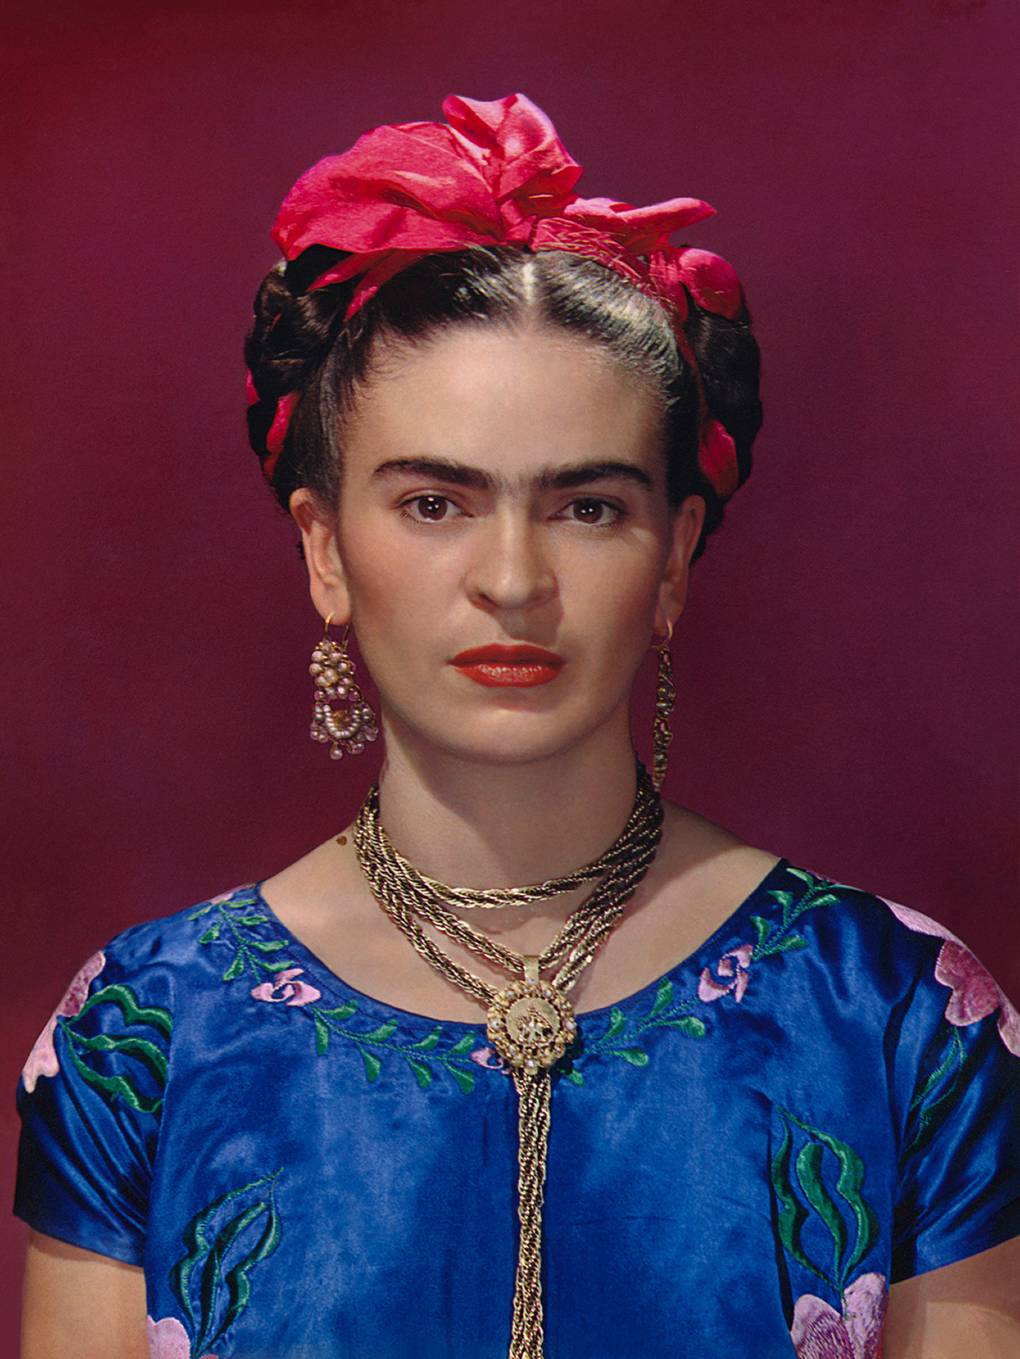 Frida Kahlo exhibition at the Victoria and Albert Museum London